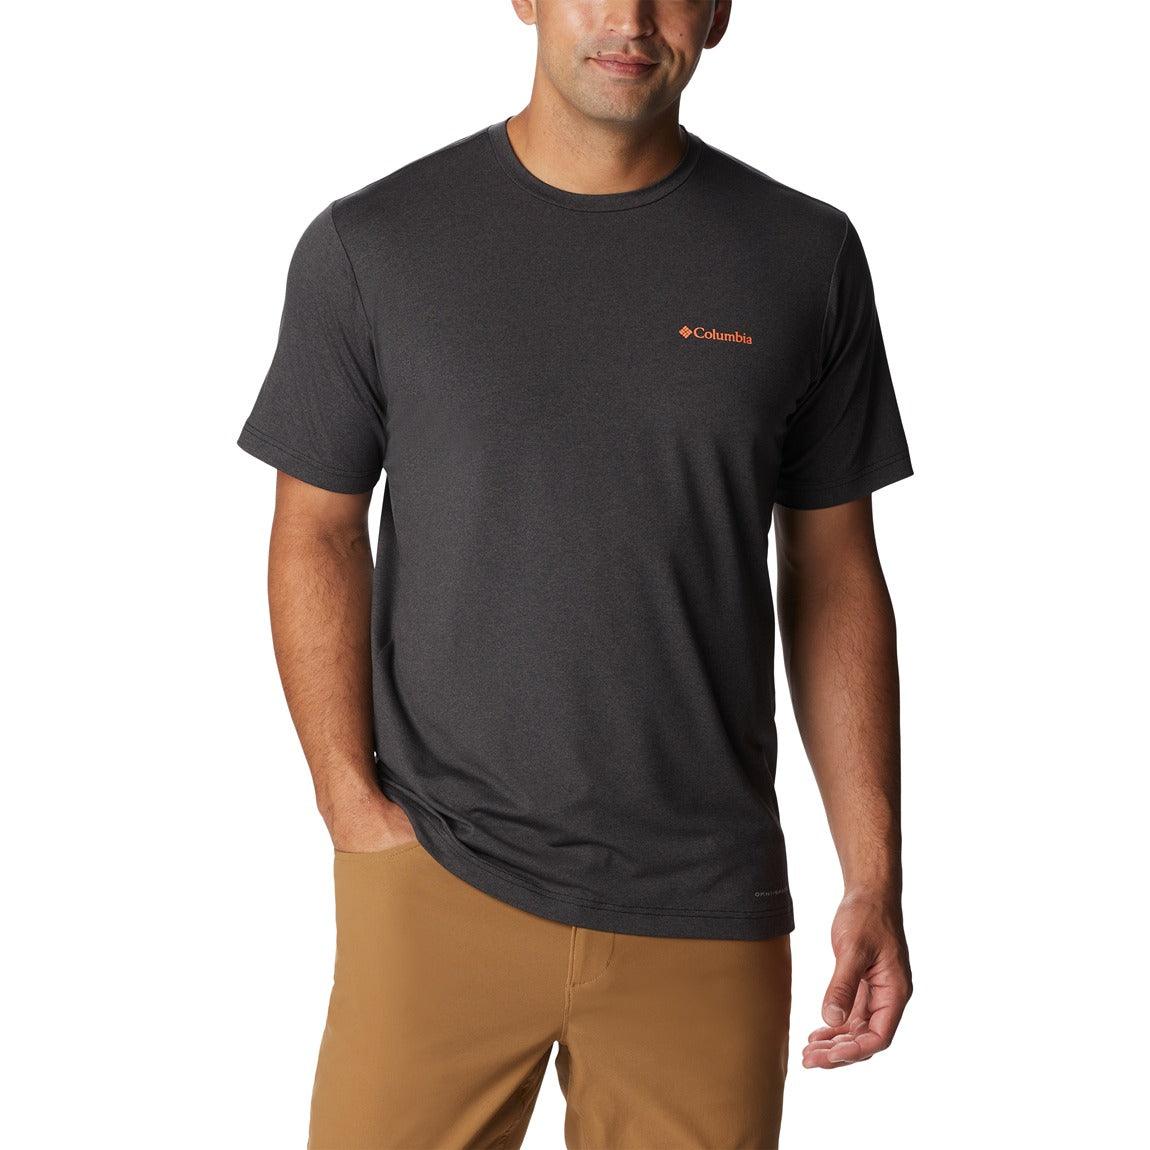 Tech Trail™ Graphic Tee - Men - Sports Excellence